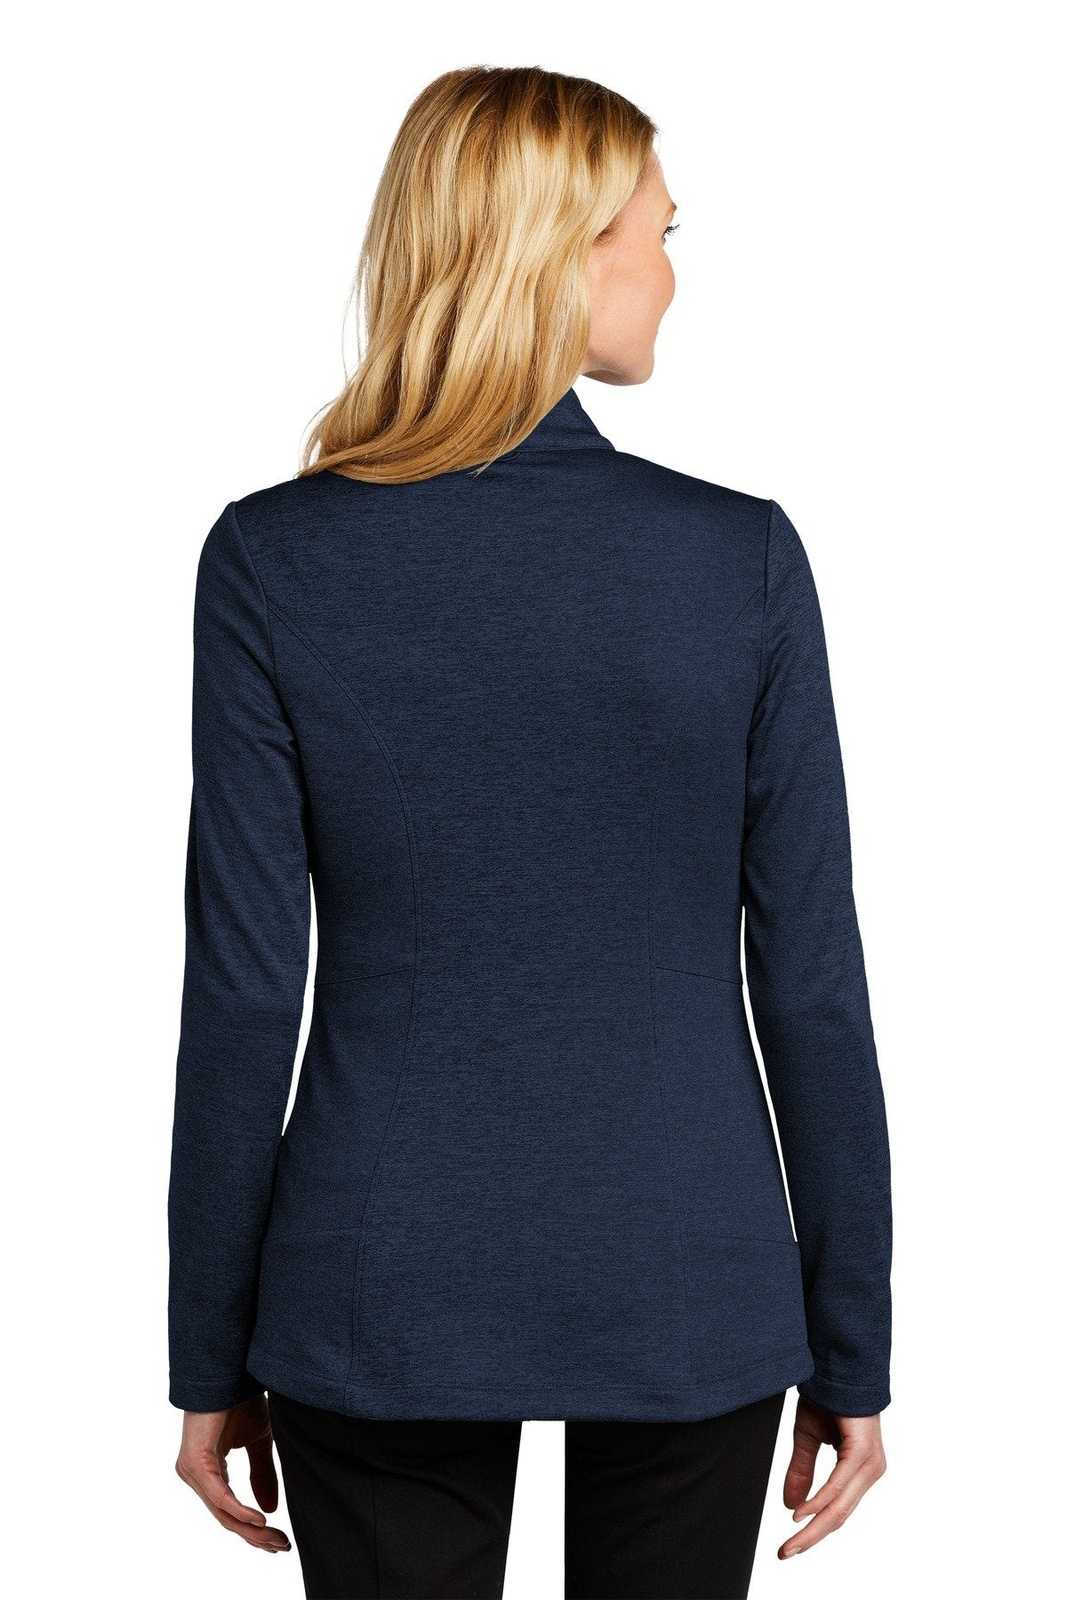 Port Authority L905 Ladies Collective Striated Fleece Jacket - River Blue Navy Heather - HIT a Double - 1